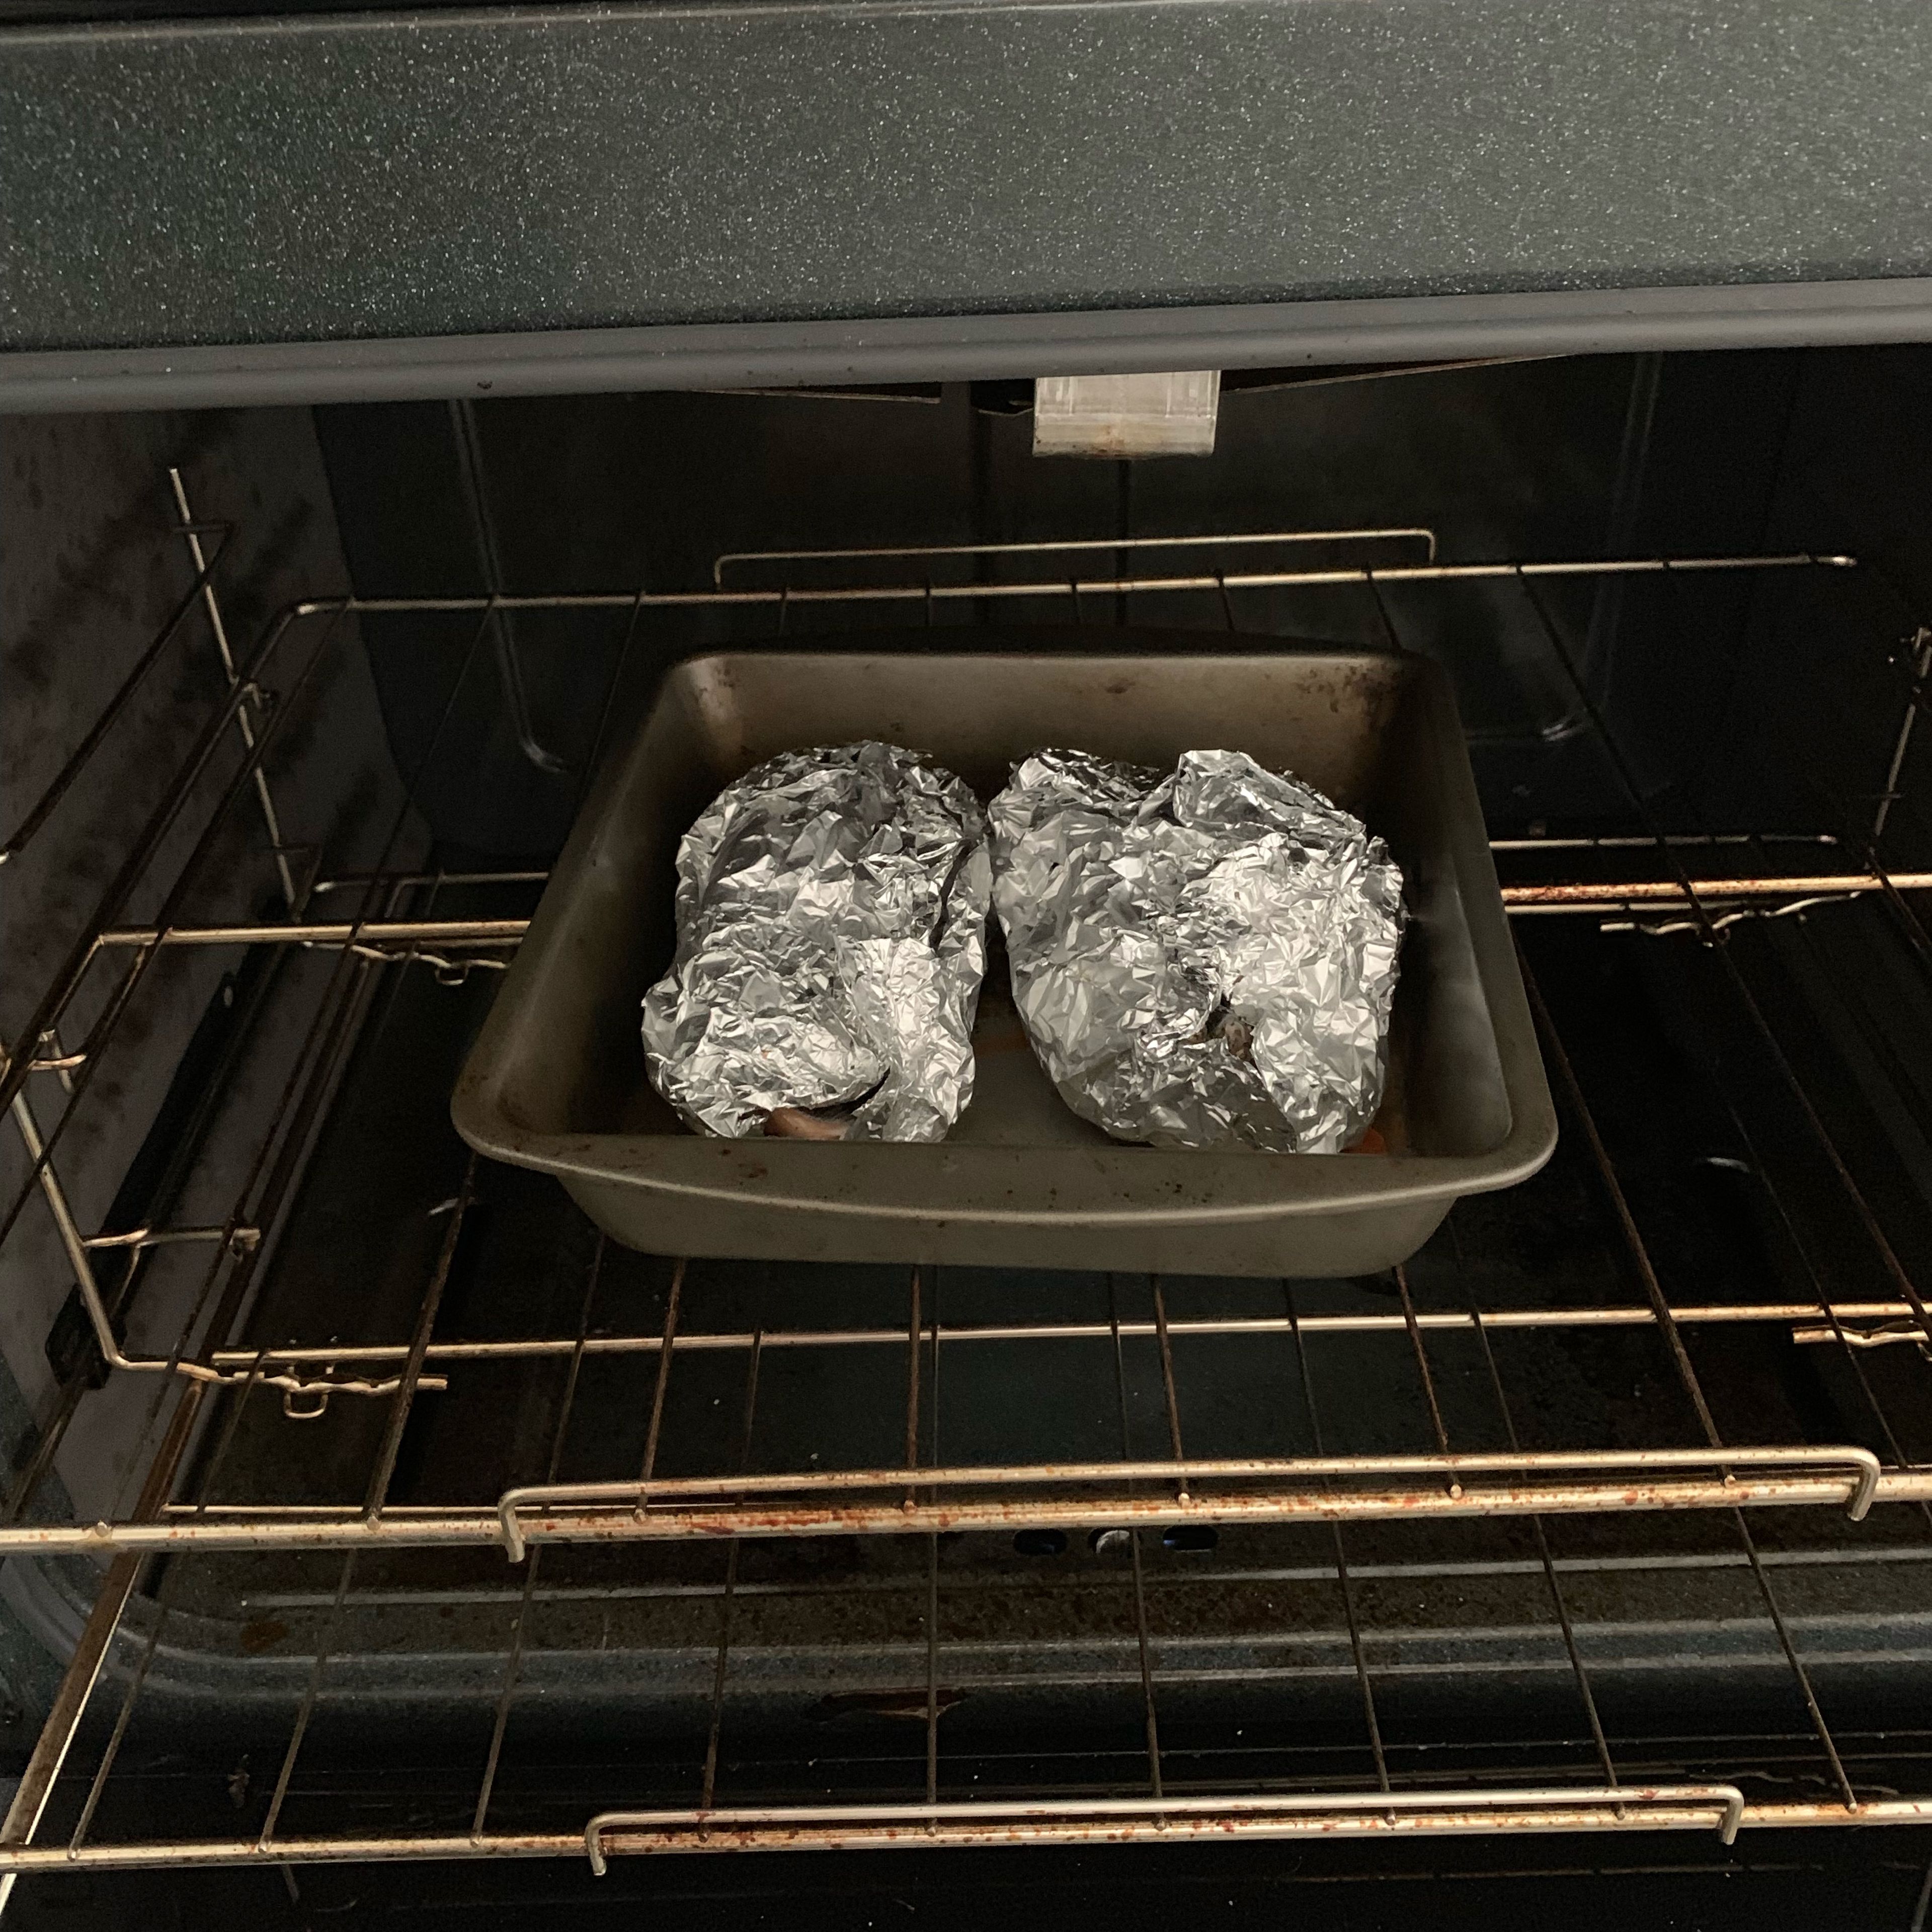 When ready to cook, heat oven. Place packages in a roasting pan. (Or they can be cooked on top of the stove in 2 skillets over medium- high heat.) Cook 5 minutes (for medium-rare) to 8 minutes from the time the mixture starts to sizzle, or roughly 10 to 12 minutes total. Sometimes if the fillet is frozen or refrigerated and it is still cold, I like to cook them for 40 minutes, the melting will bring a lot of flavor with paste created by the cooking process and the water on the fillet.